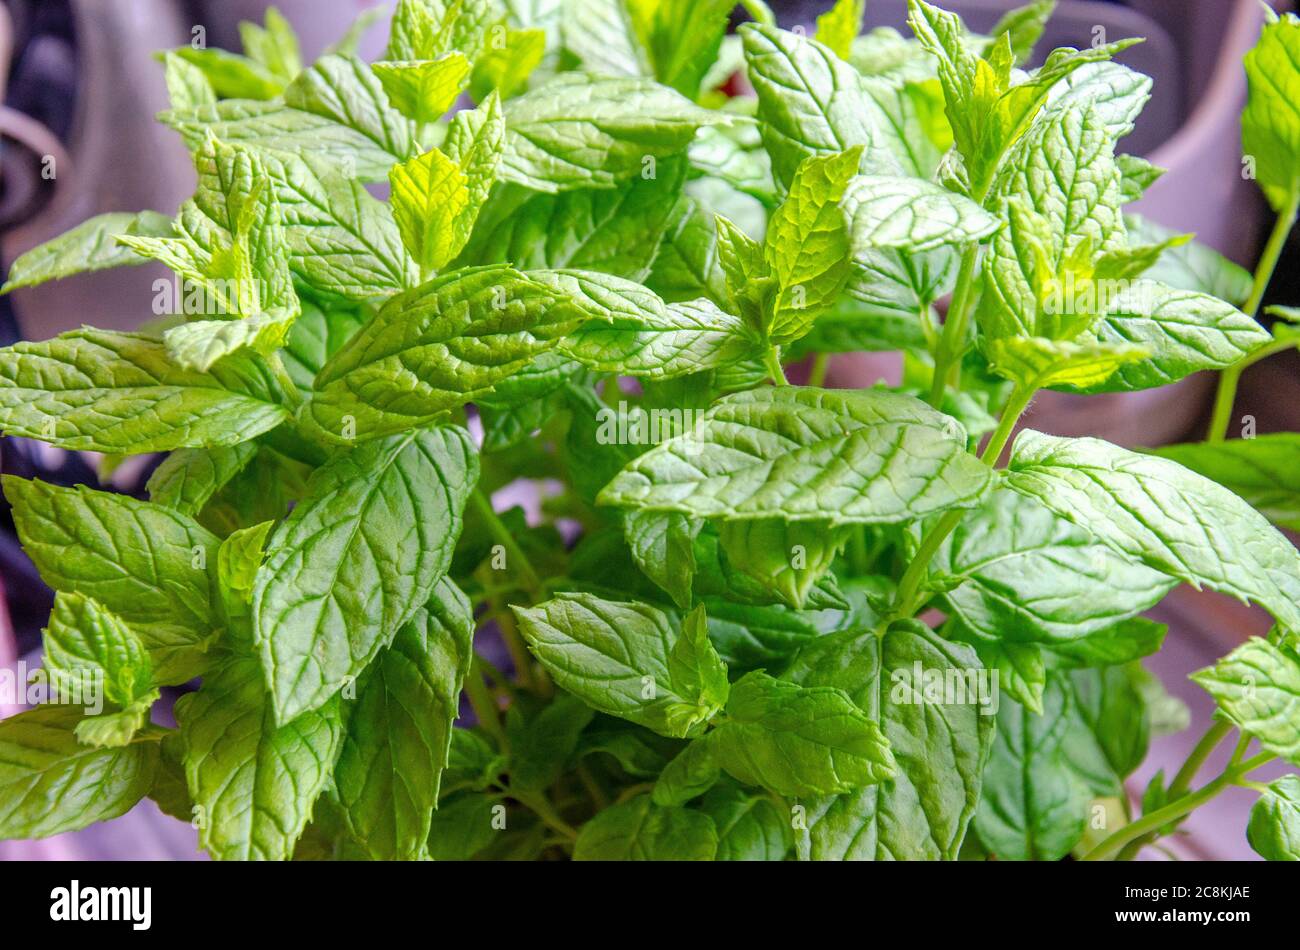 Close up view of green mint leaves. Stock Photo